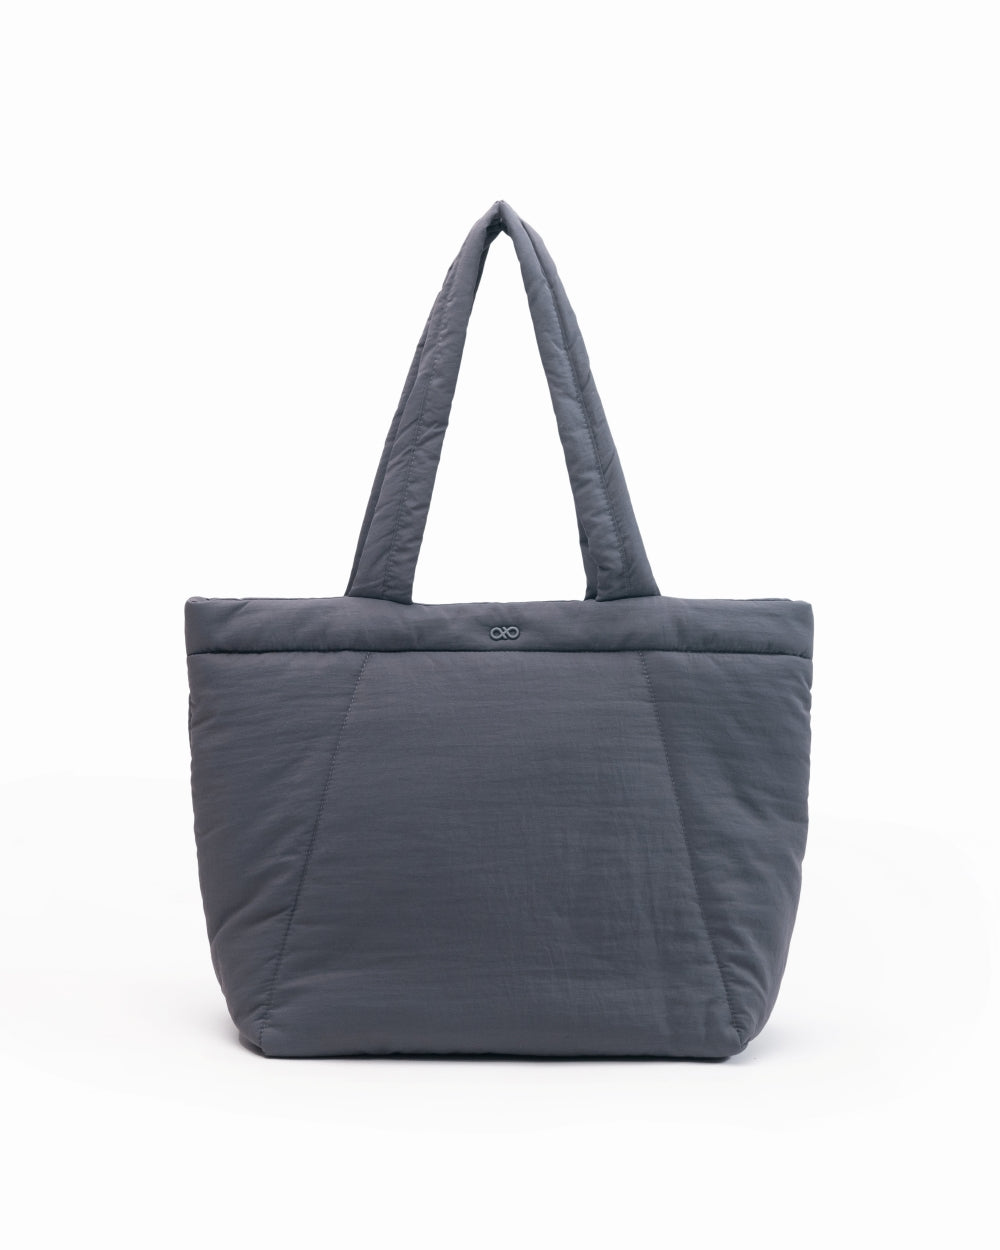 COSY PUFFY TOTE BAG IN SMOKEY